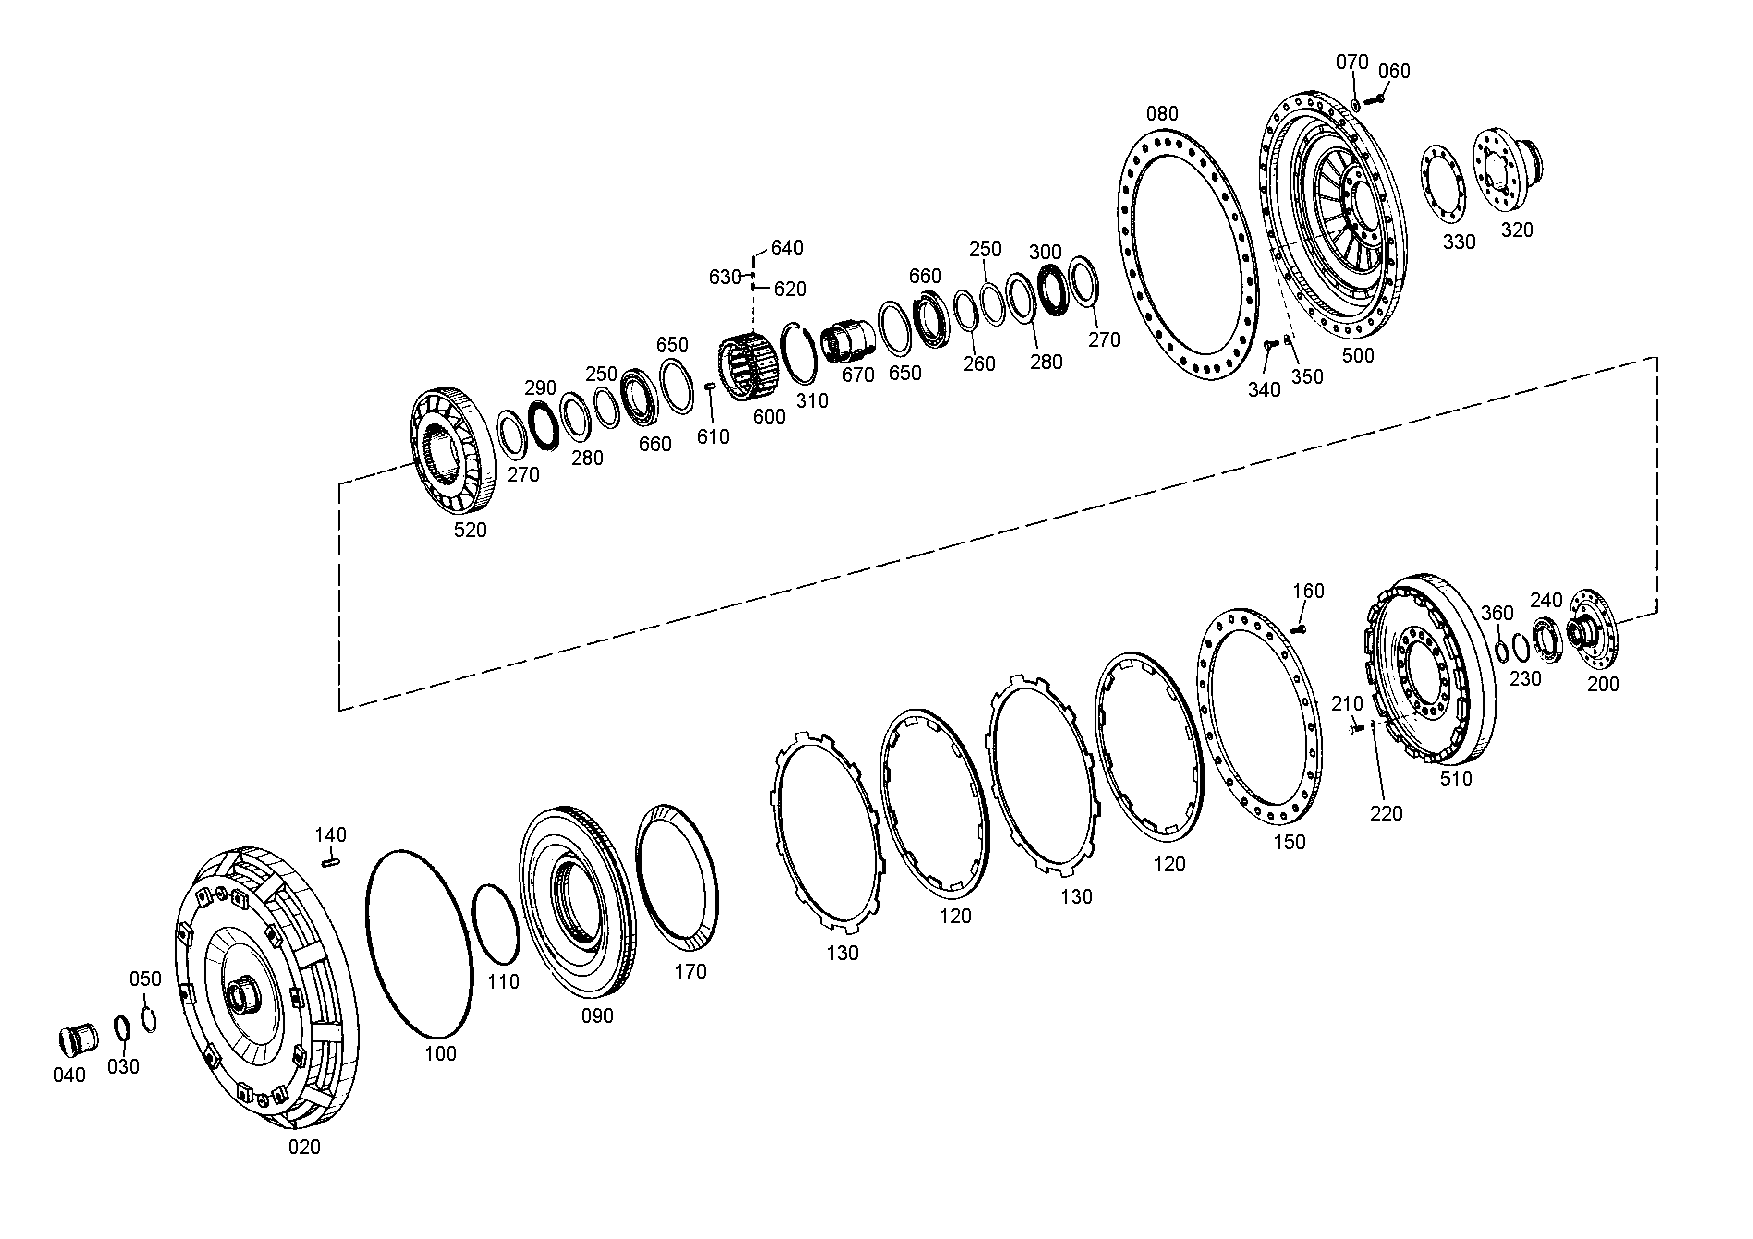 drawing for BEISSBARTH & MUELLER GMBH & CO. 09398168 - RECTANGULAR RING (figure 3)